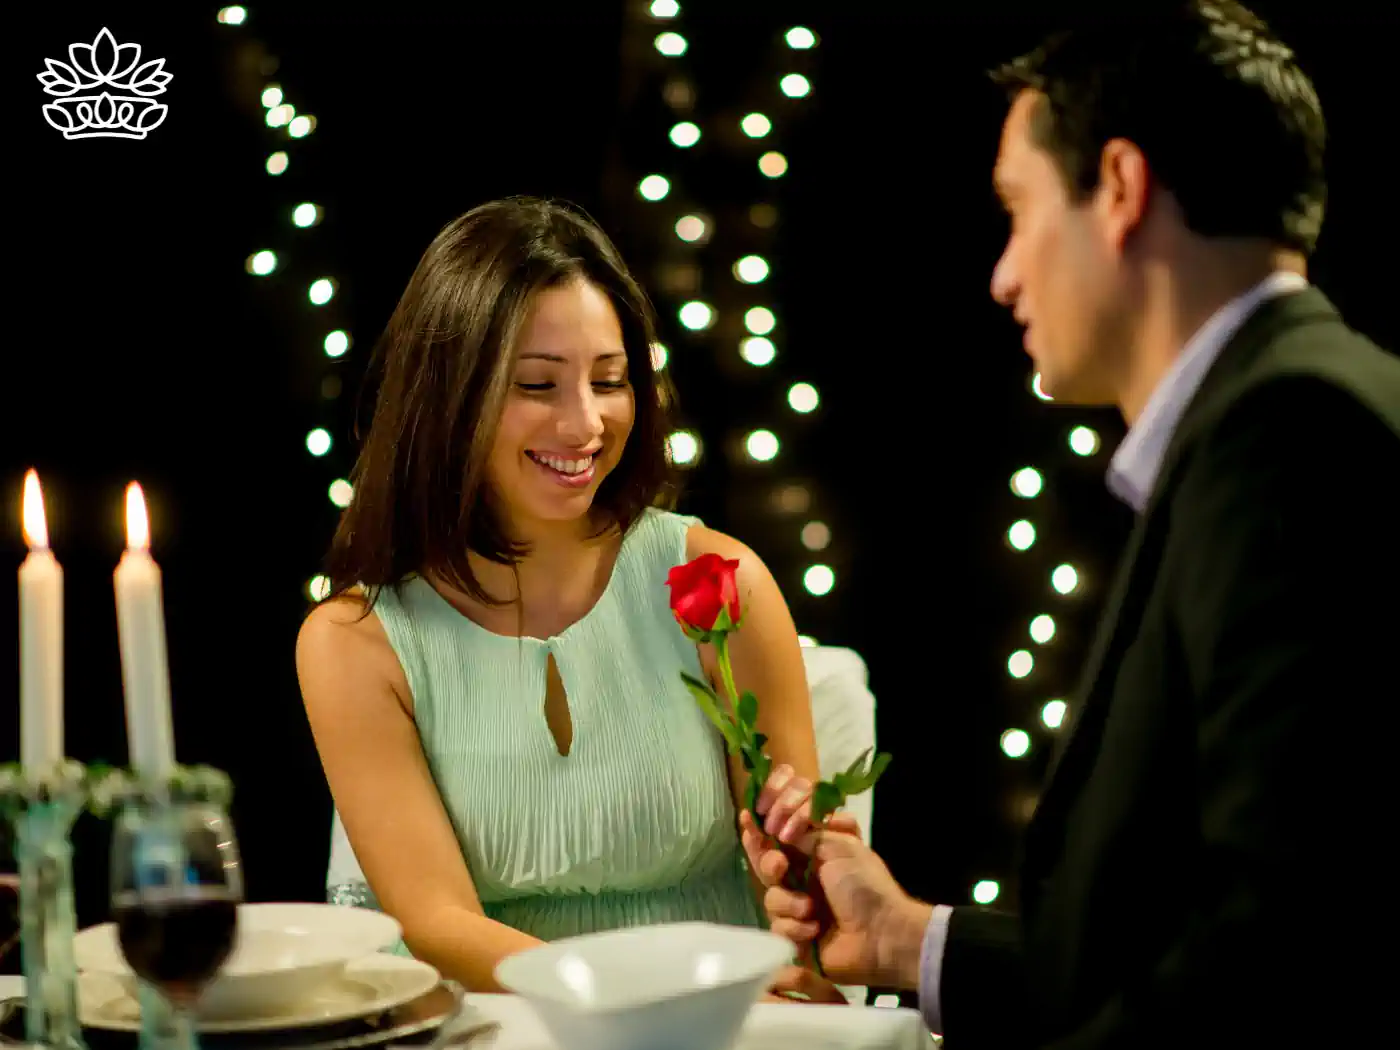 A woman smiles as she receives a romantic red rose from a man during a candlelit dinner, with twinkling lights in the background. Fabulous Flowers and Gifts delivered with heart. Expect Tips for Valentine's Day Flowers.